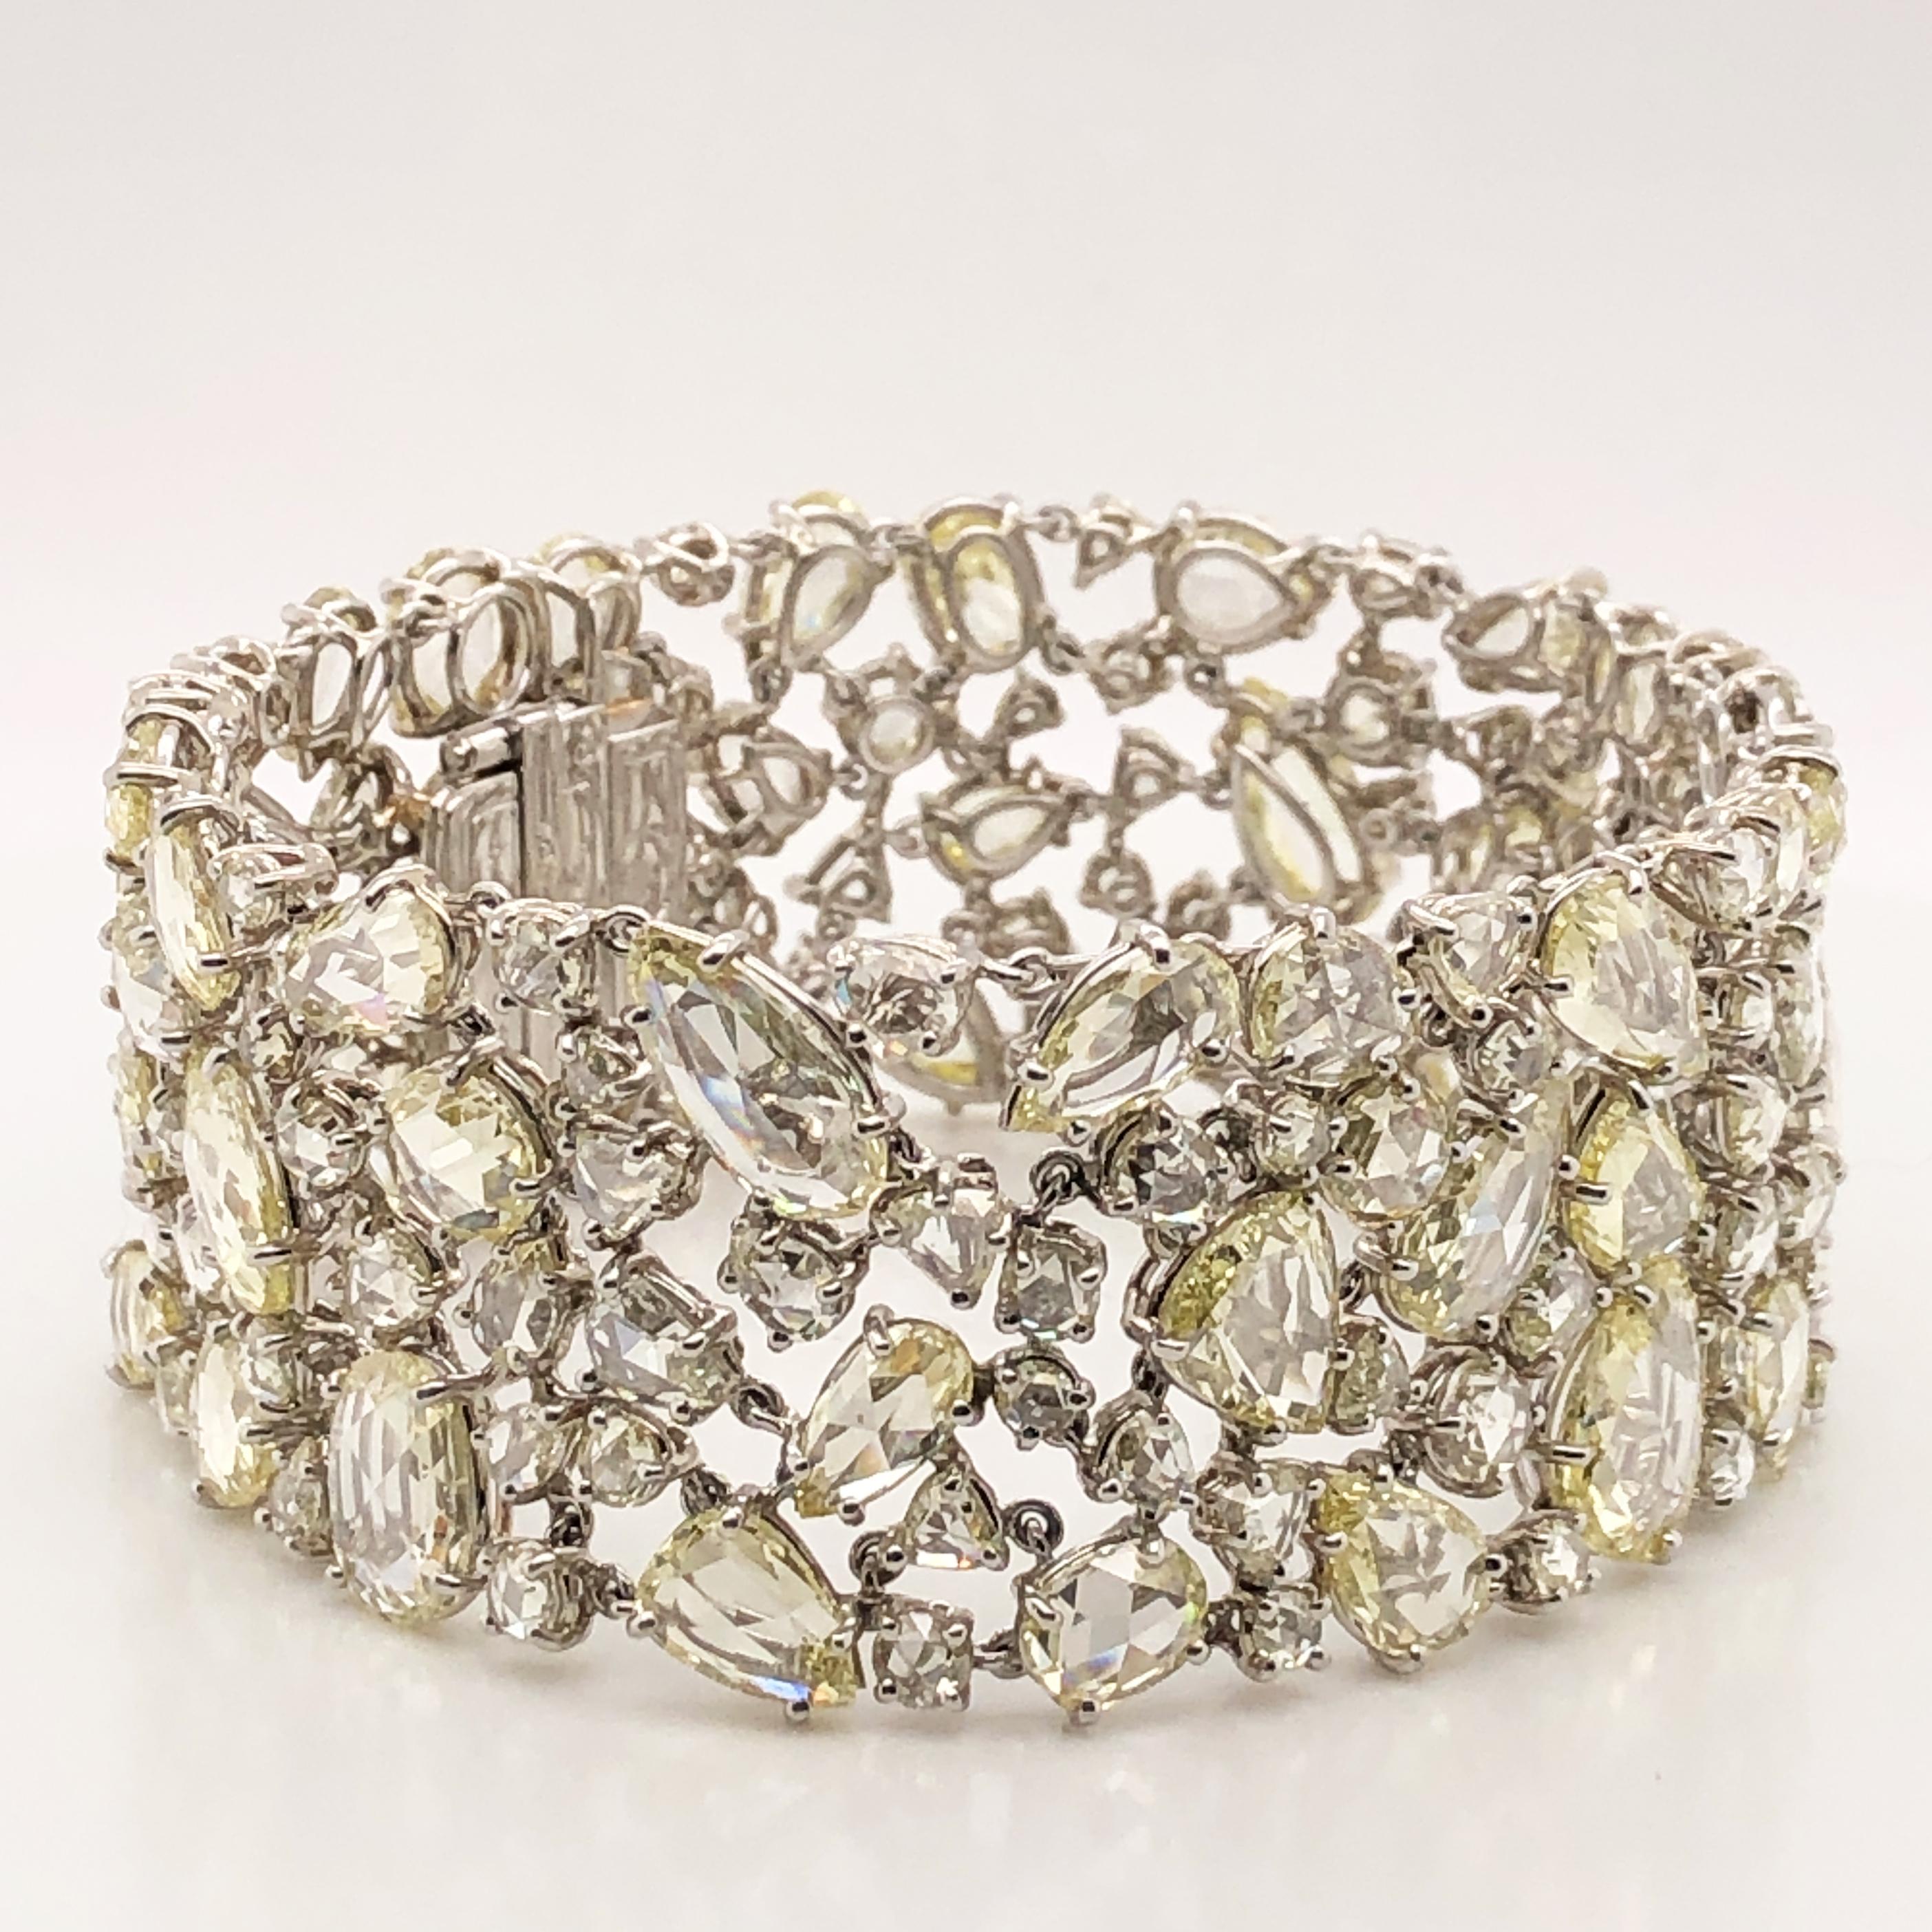 Oscar Heyman platinum bracelet with 156 Rose Cut Diamonds weighing 47.65cts. It is stamped with the makers mark, IRID PLAT, and serial number 804509.

The bracelet measures 7'' in length and 1'' in width, and has a hidden box clasp with a